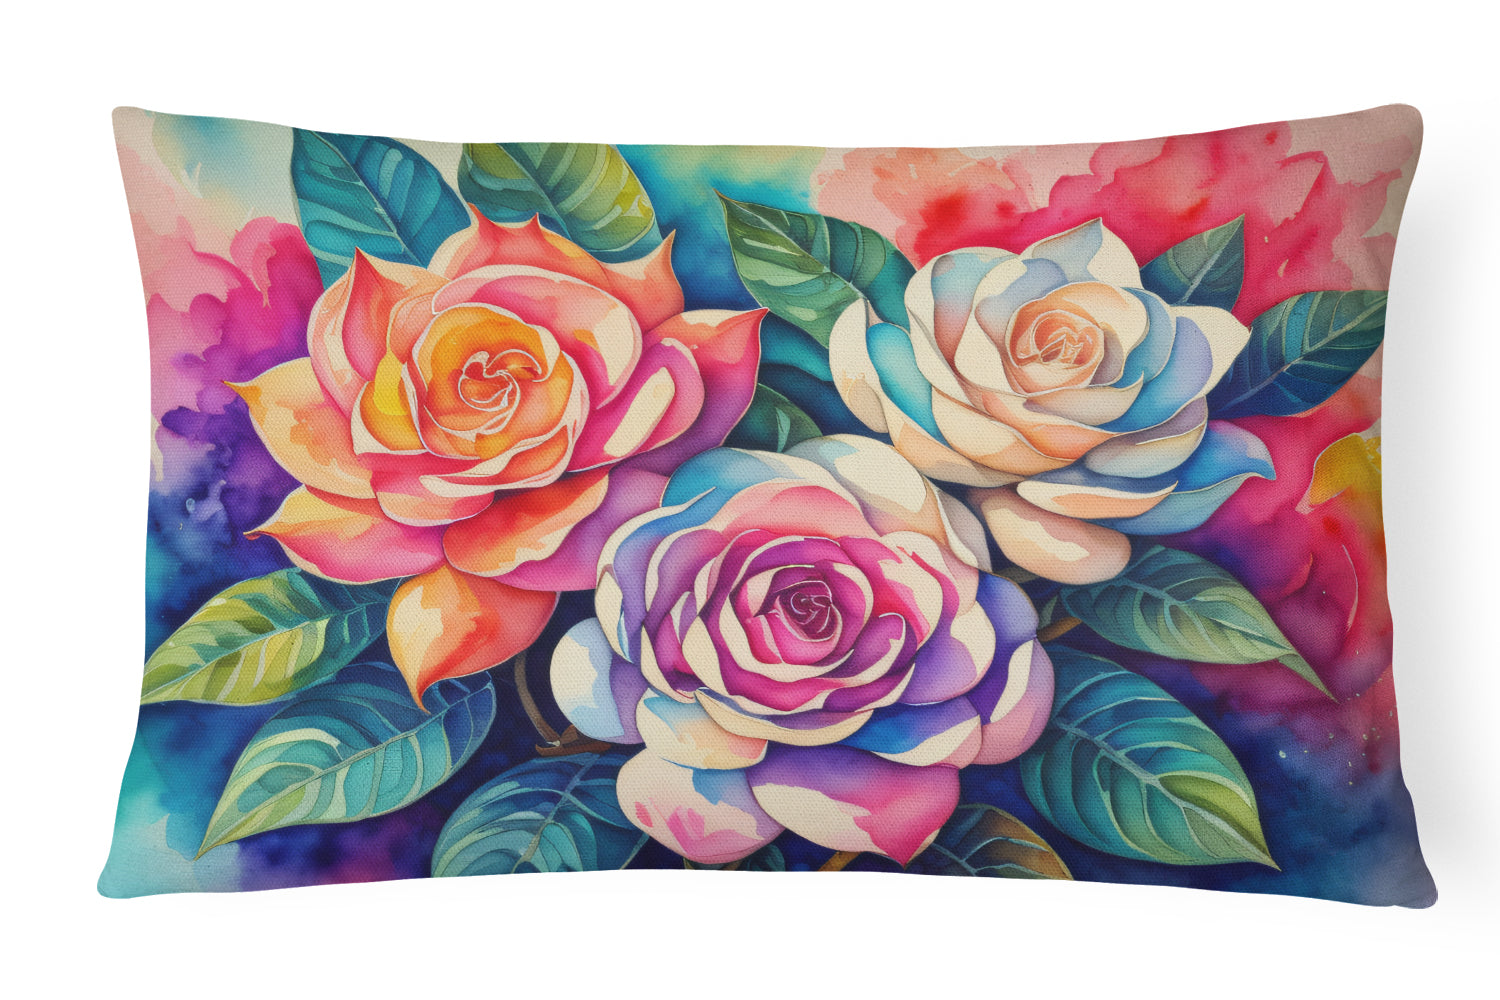 Buy this Gardenias in Color Fabric Decorative Pillow